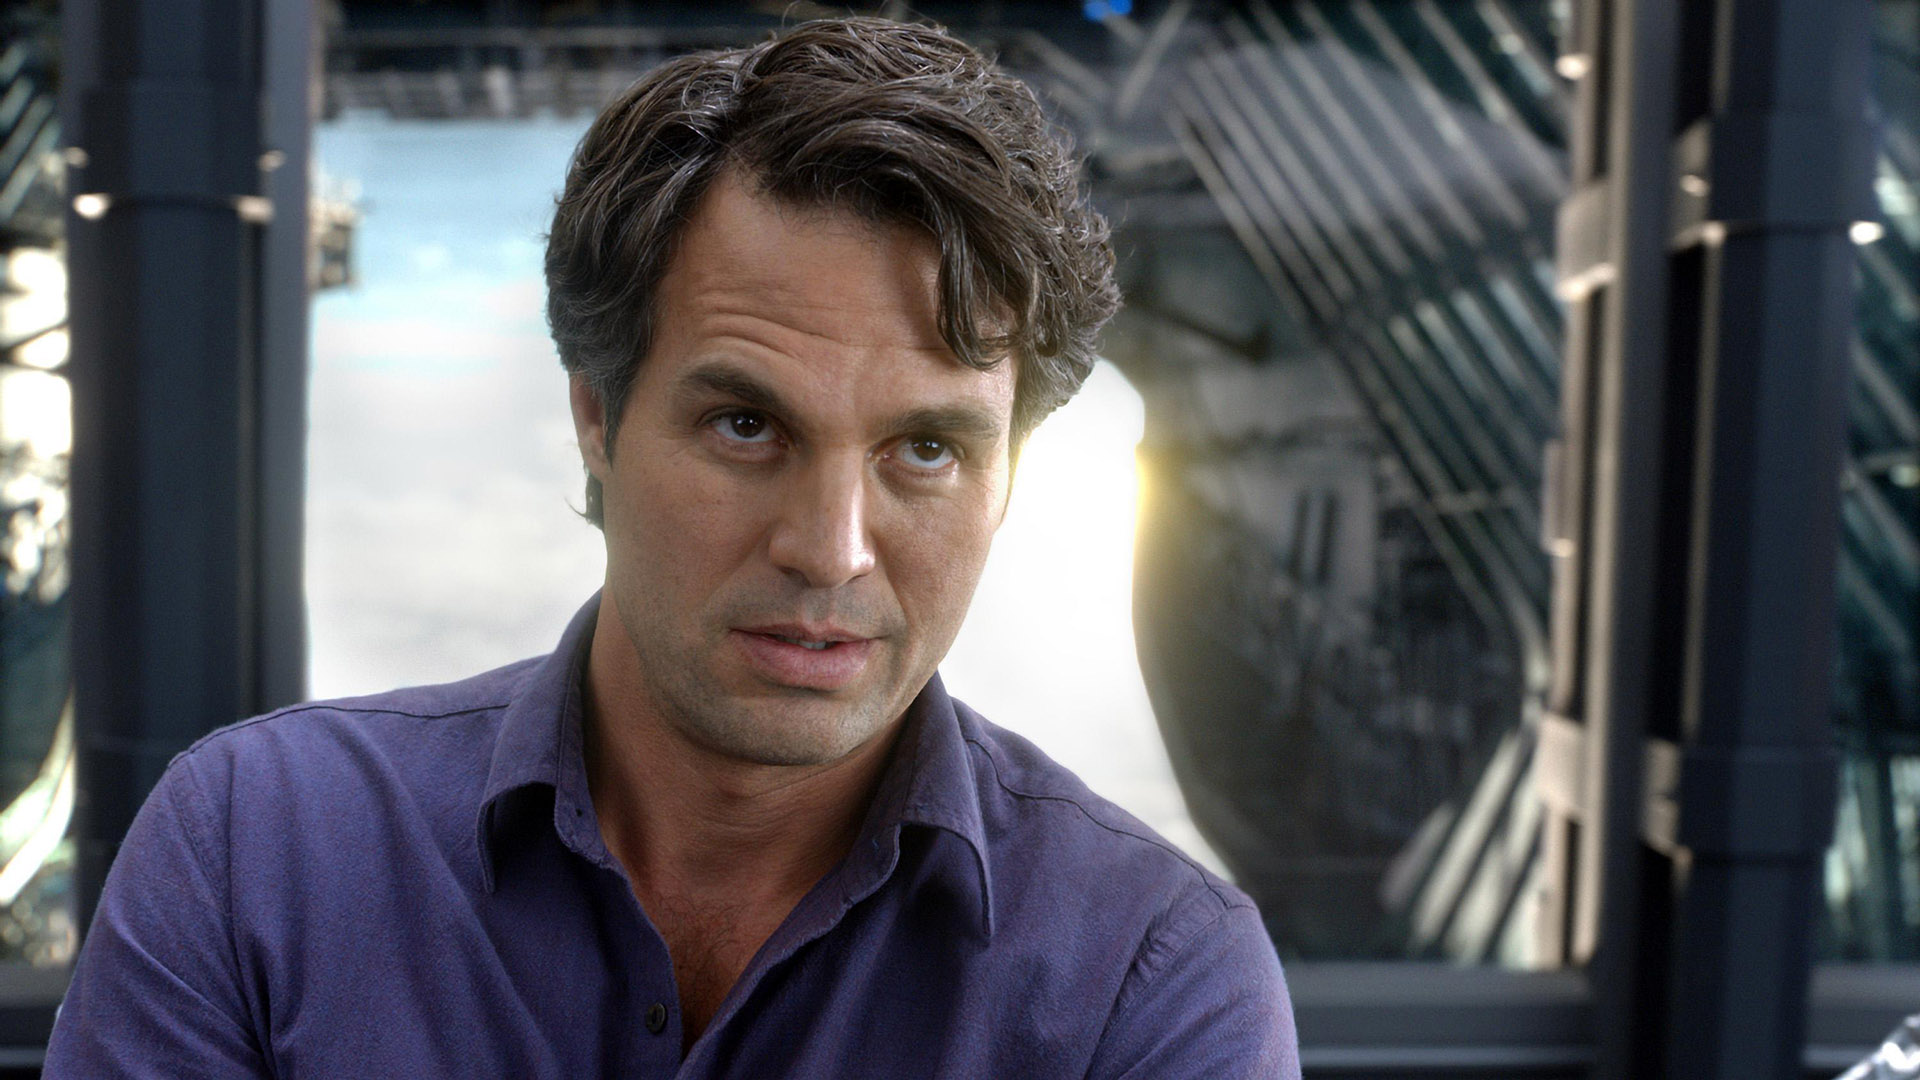 15 Underrated Mark Ruffalo Movies That Deserve More Credit